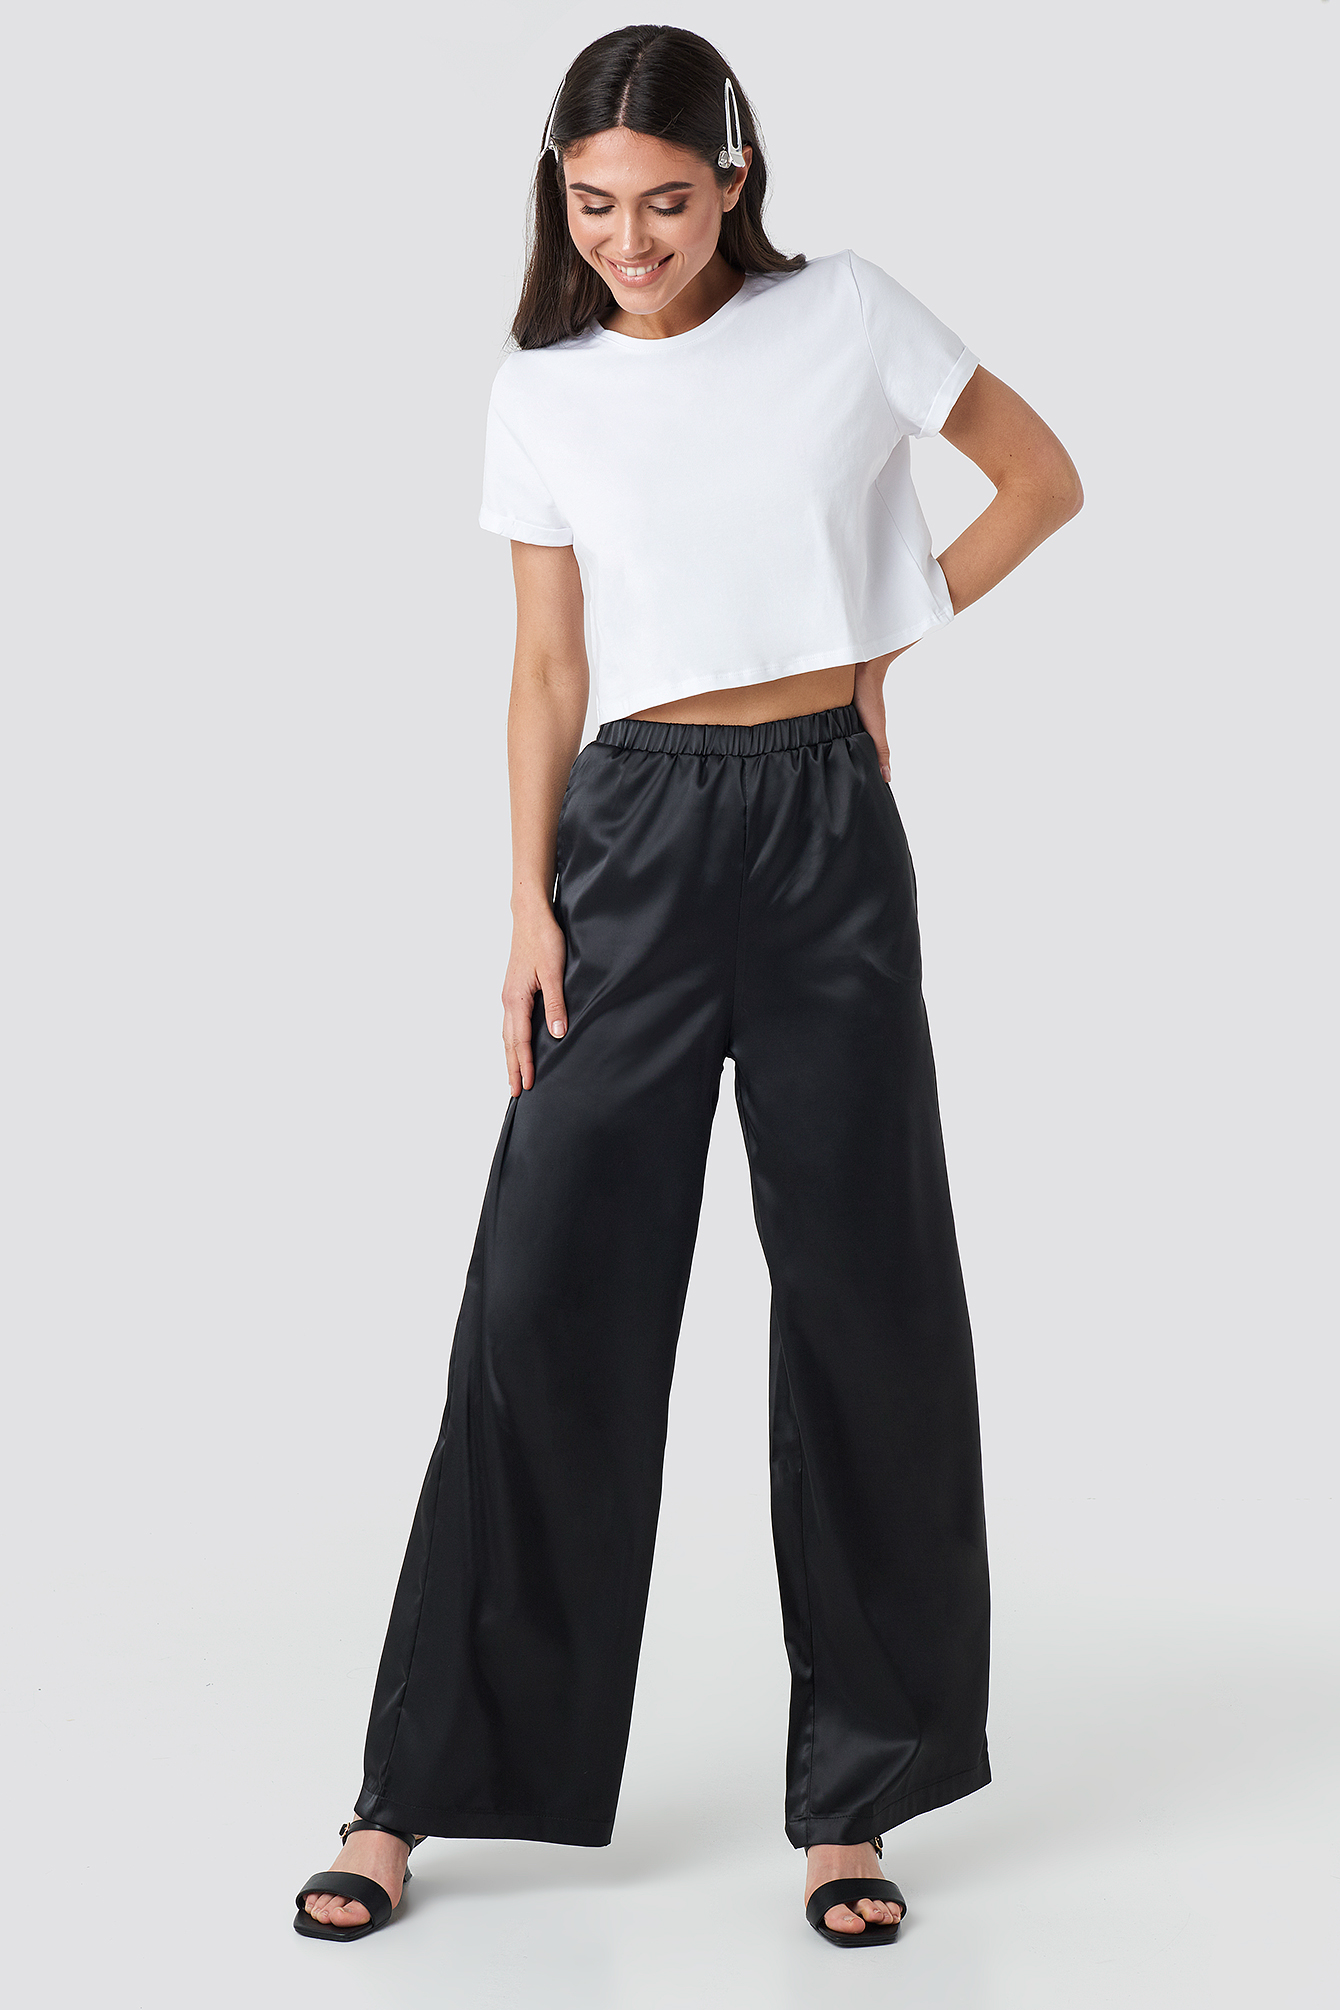 Top more than 56 black satin wide leg trousers latest - in.cdgdbentre